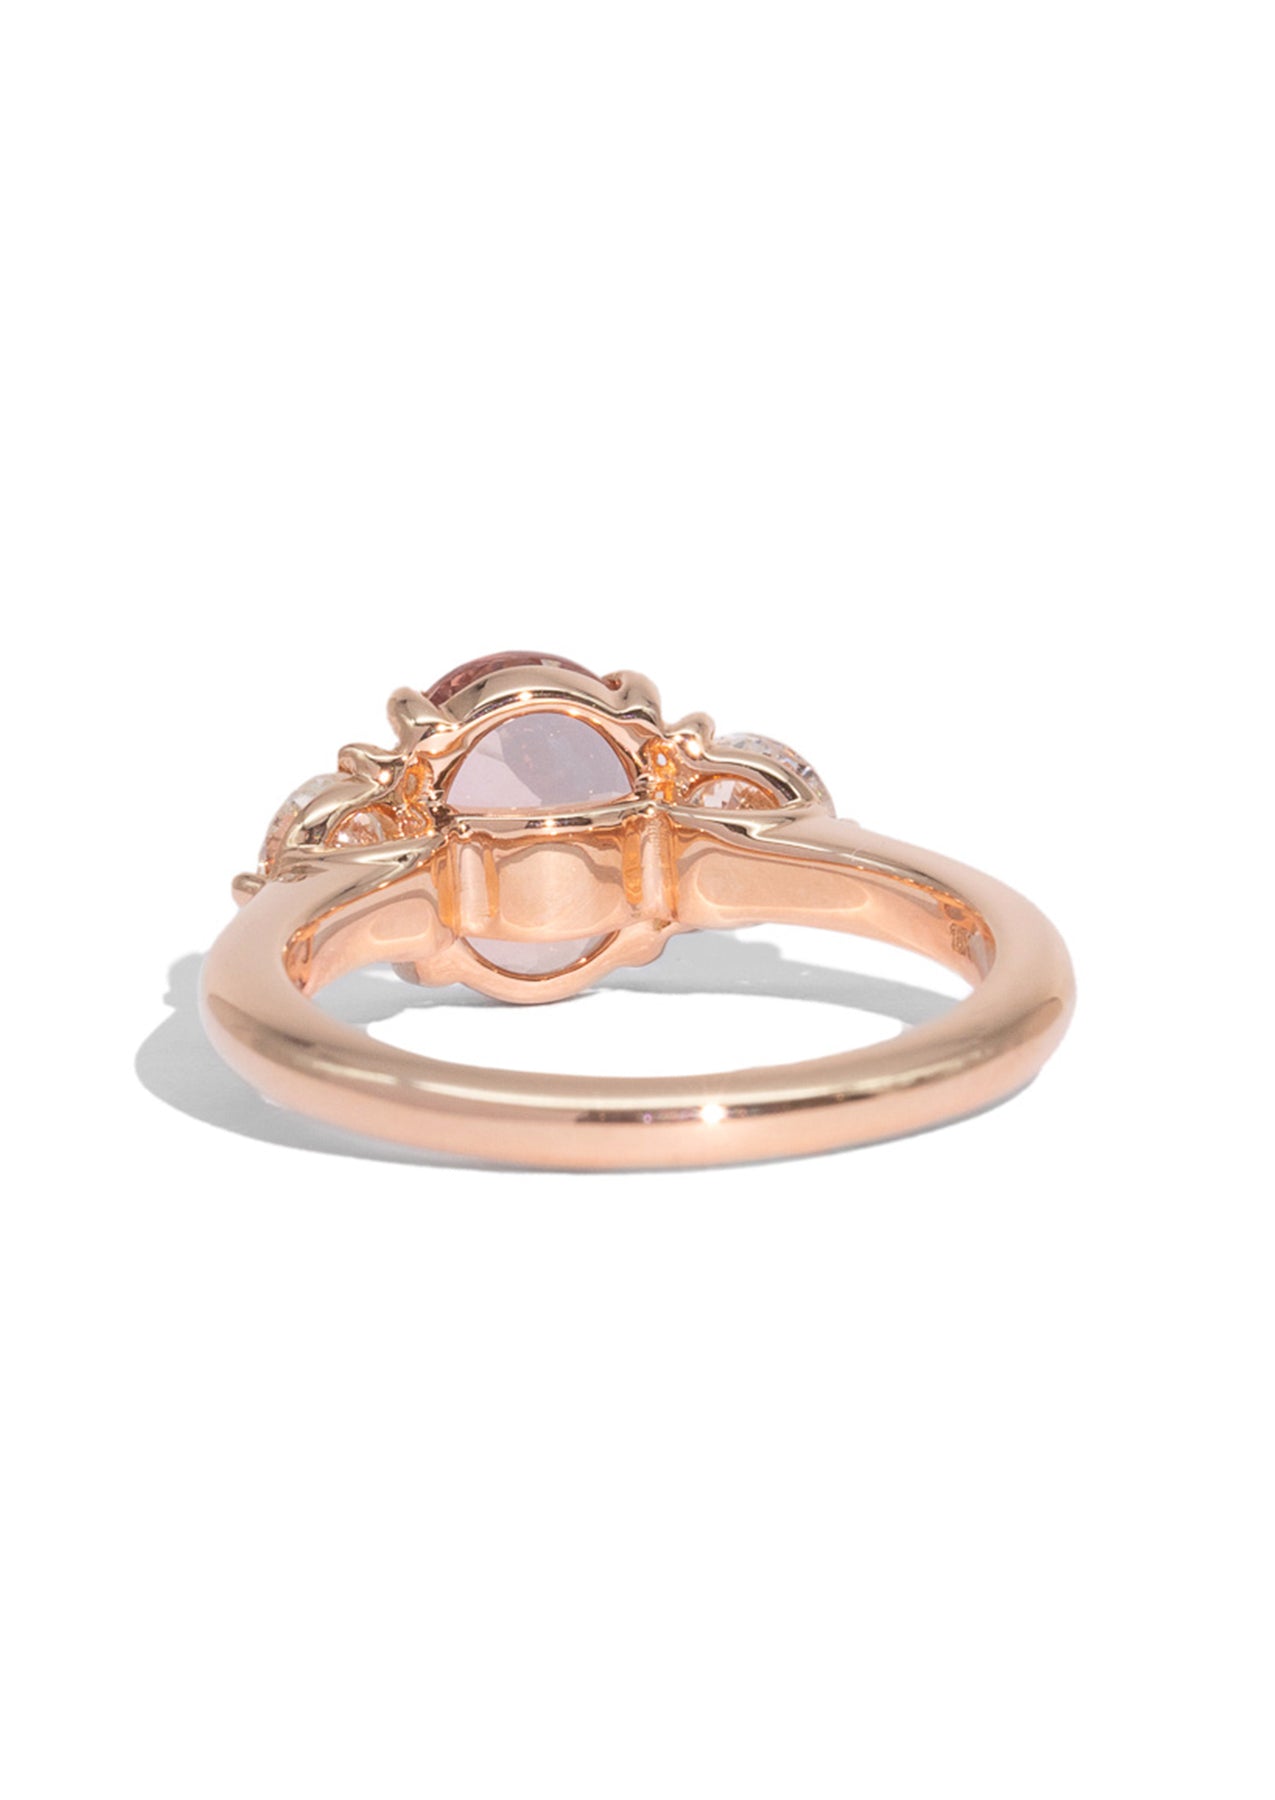 The Portia Ring with 1.65ct Oval Morganite